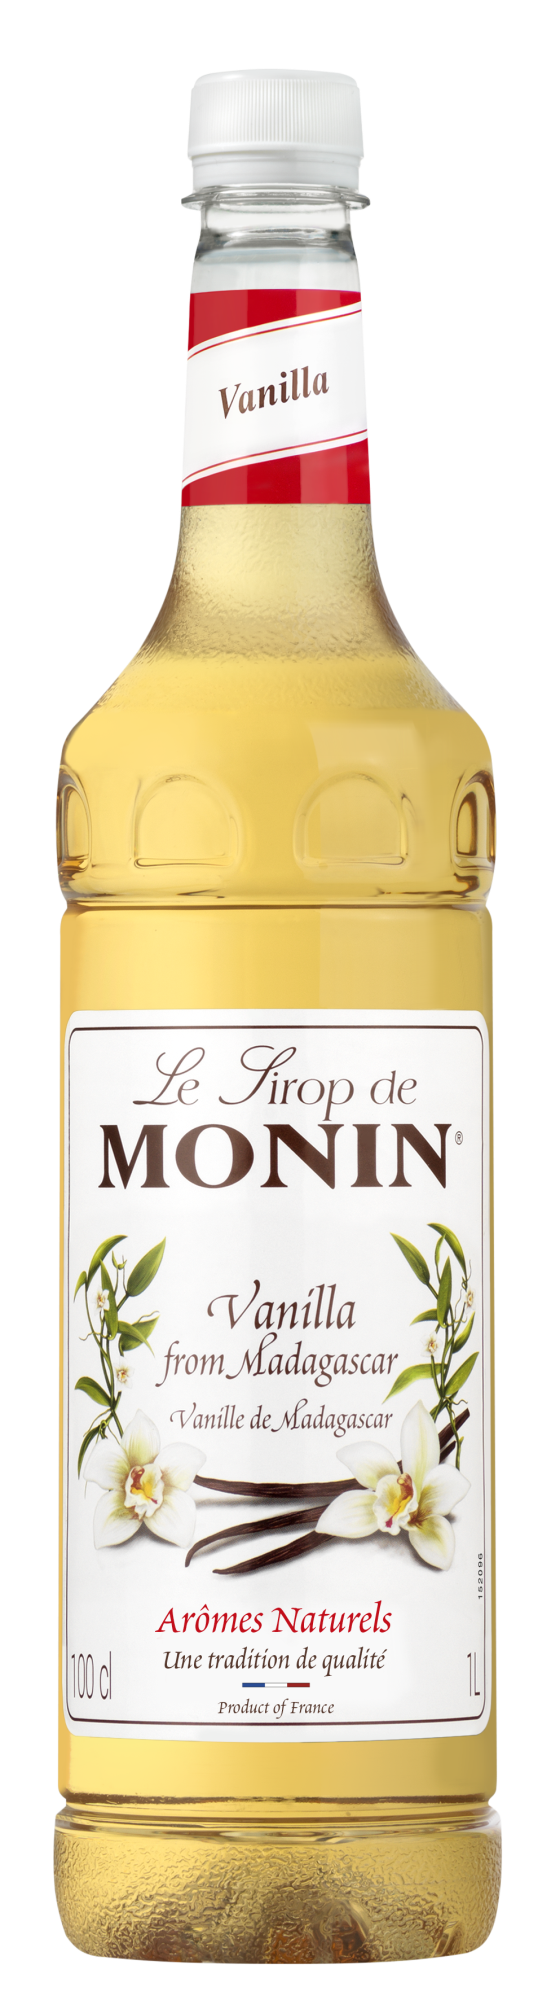 Buy MONIN Vanilla syrup. The famously smooth flavour comes from select Madagascan Vanilla beans.